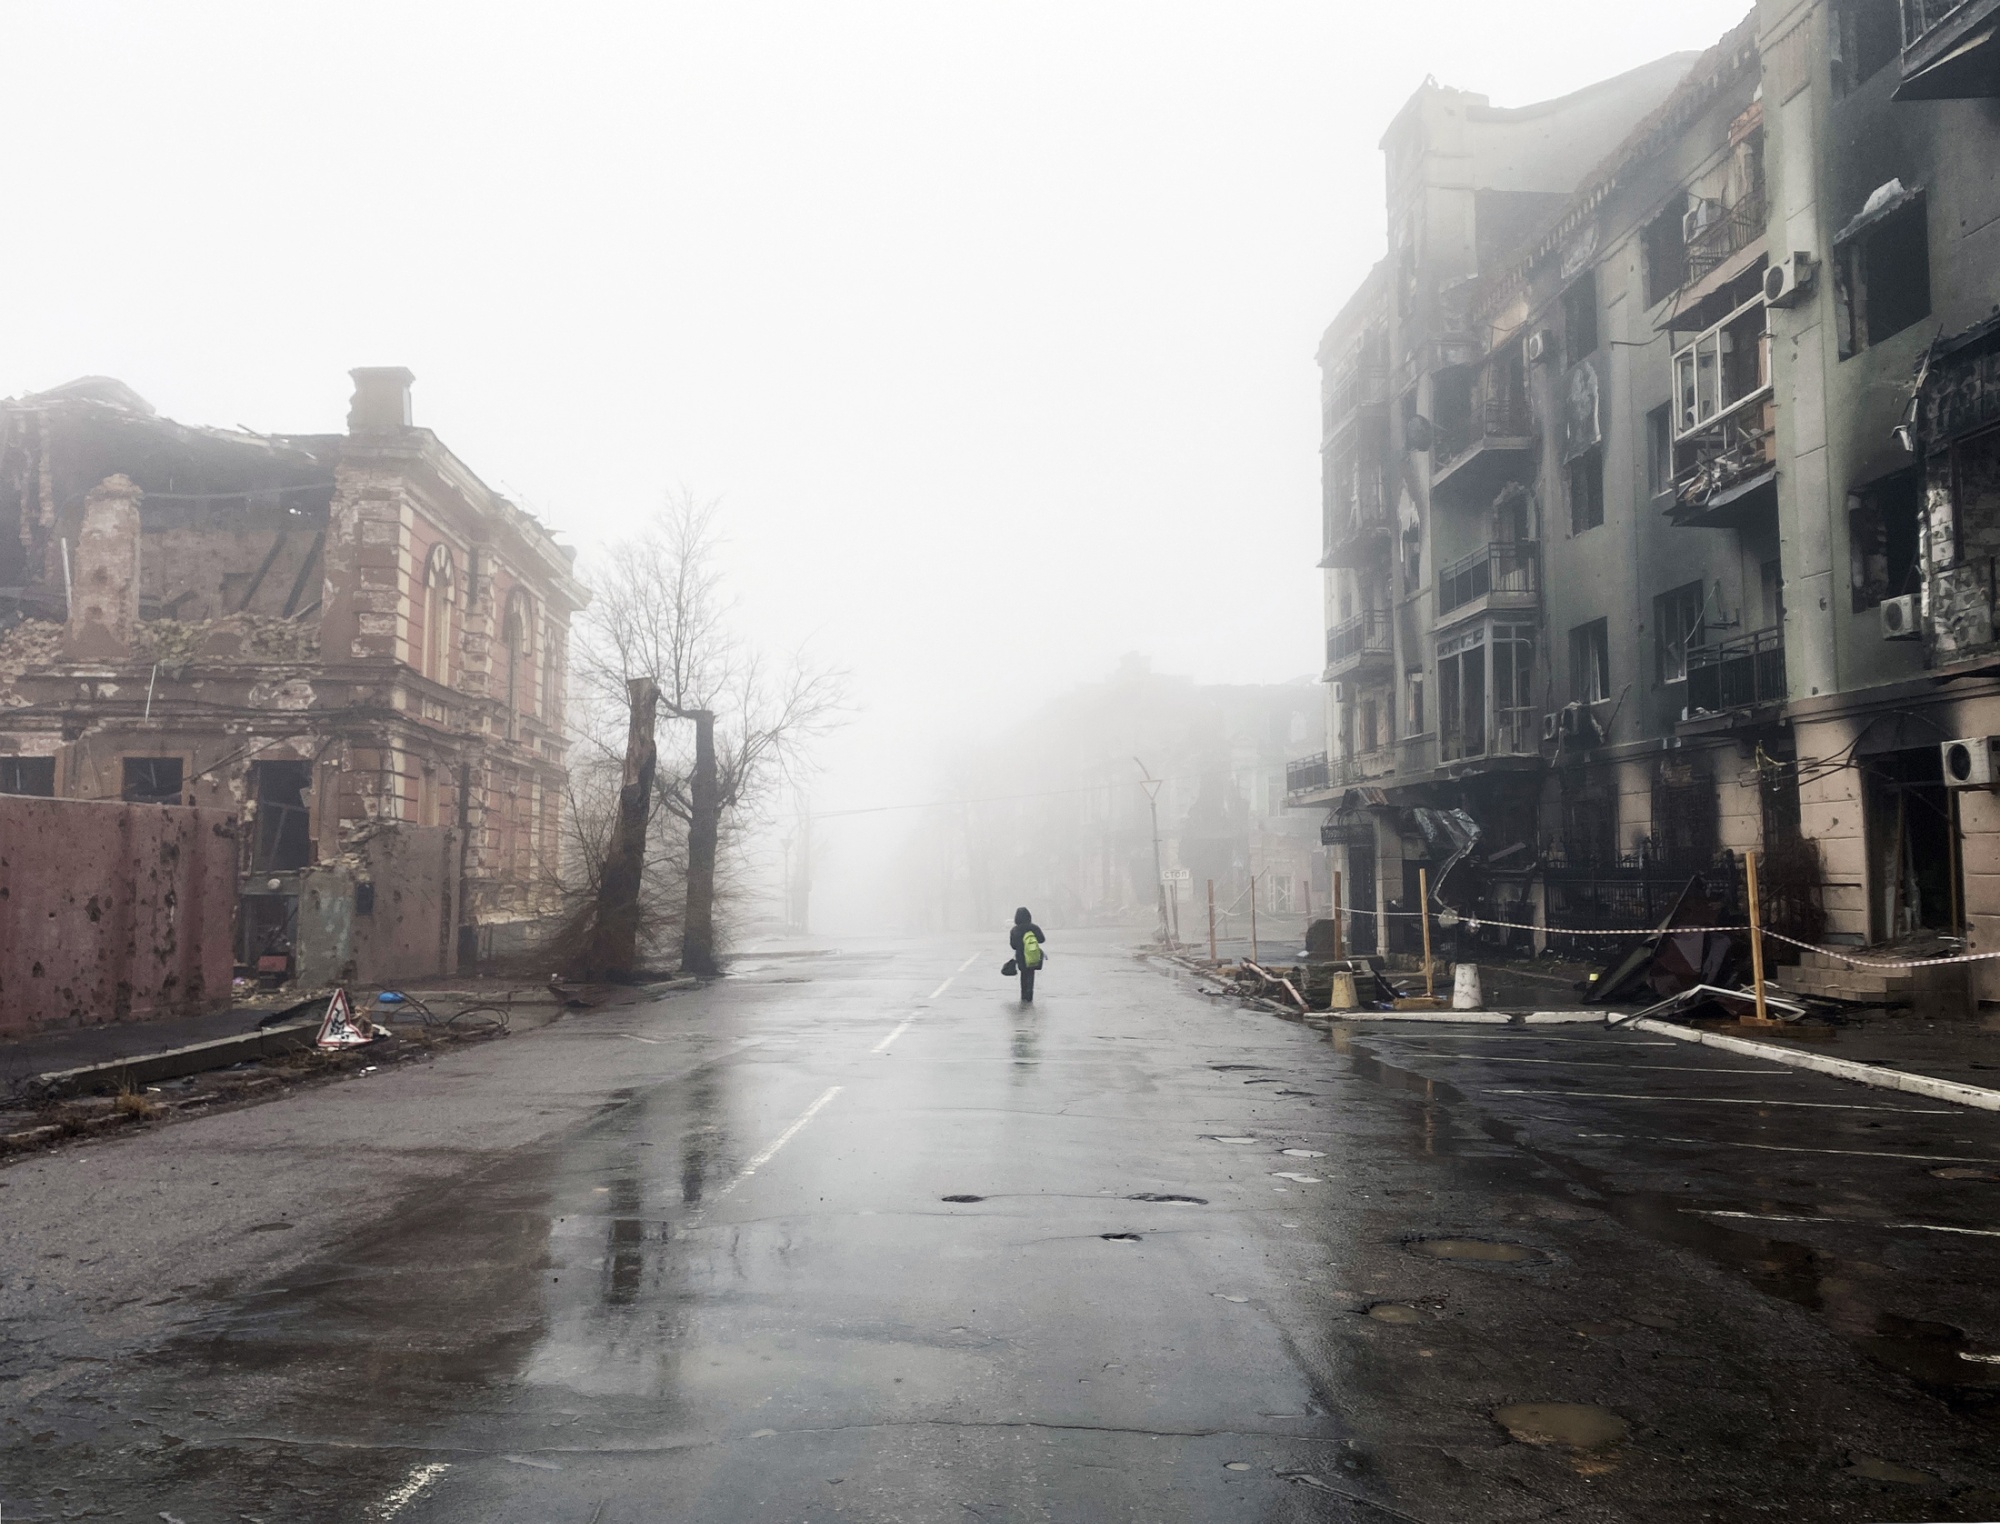 By December 2022, the conflict had destroyed much of Mariupol, Ukraine.